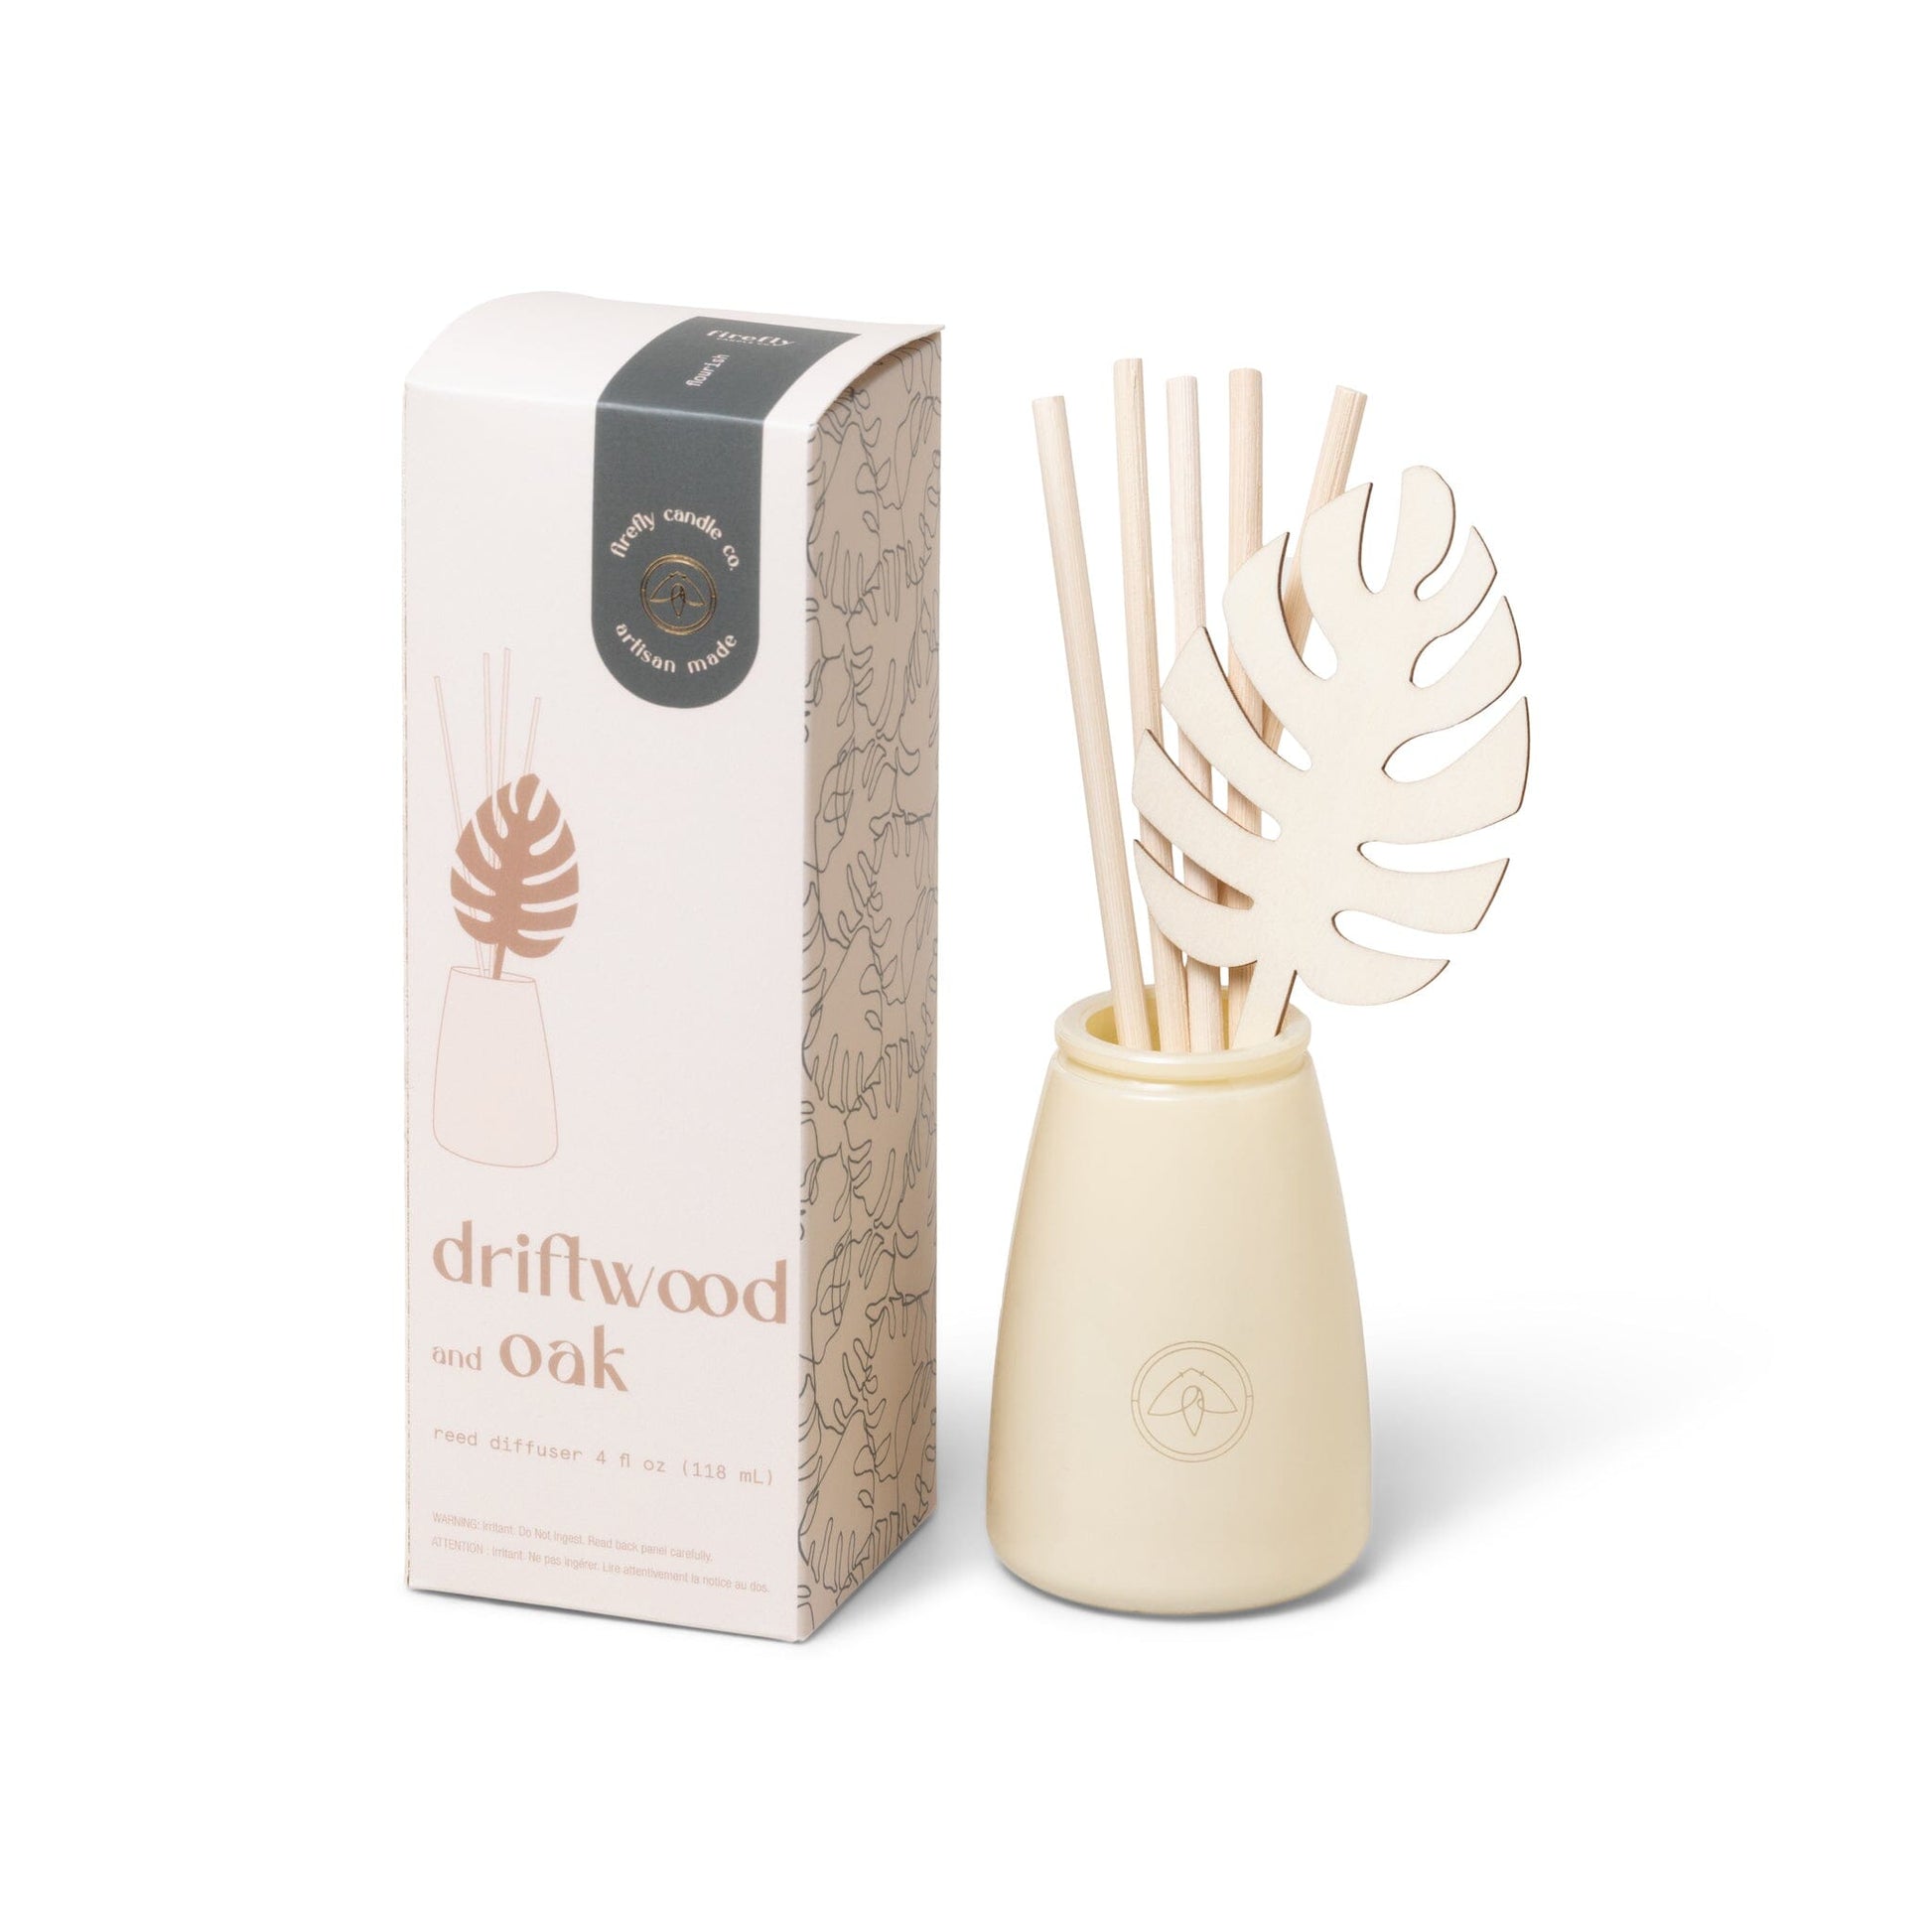 Flourish 4 oz Diffuser - Driftwood and Oak box and diffuser side by side